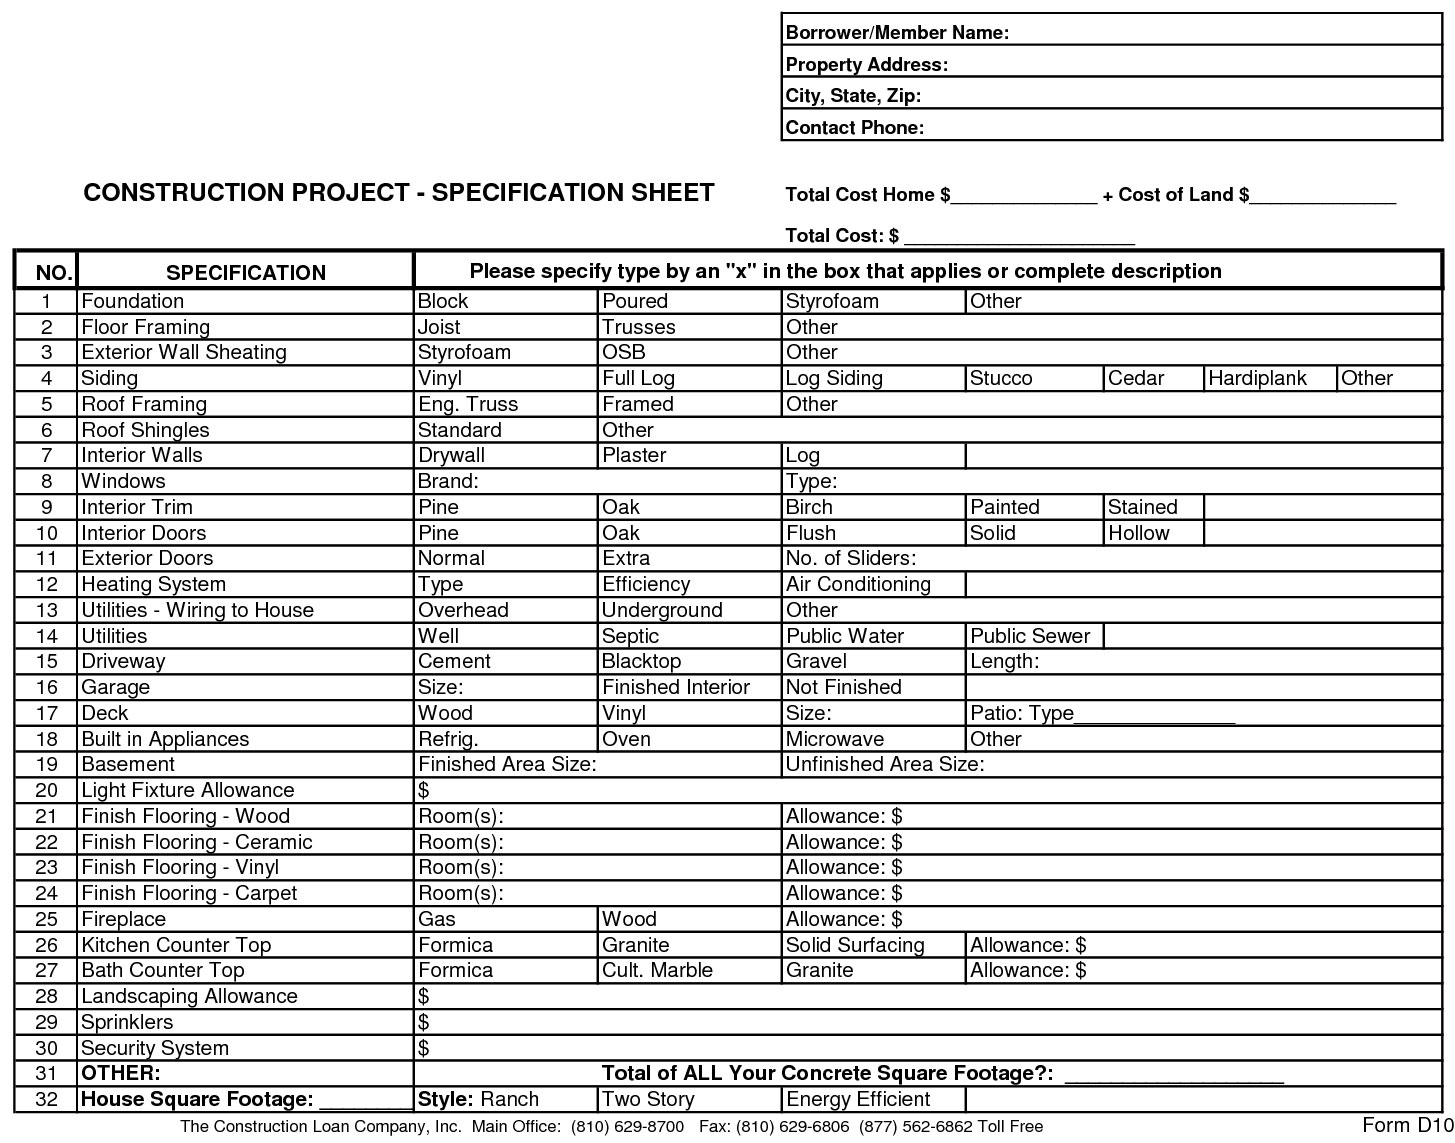 New Home Construction Cost Spreadsheet Pertaining To New Home Construction Bid Sheet  Home Construction Sheet